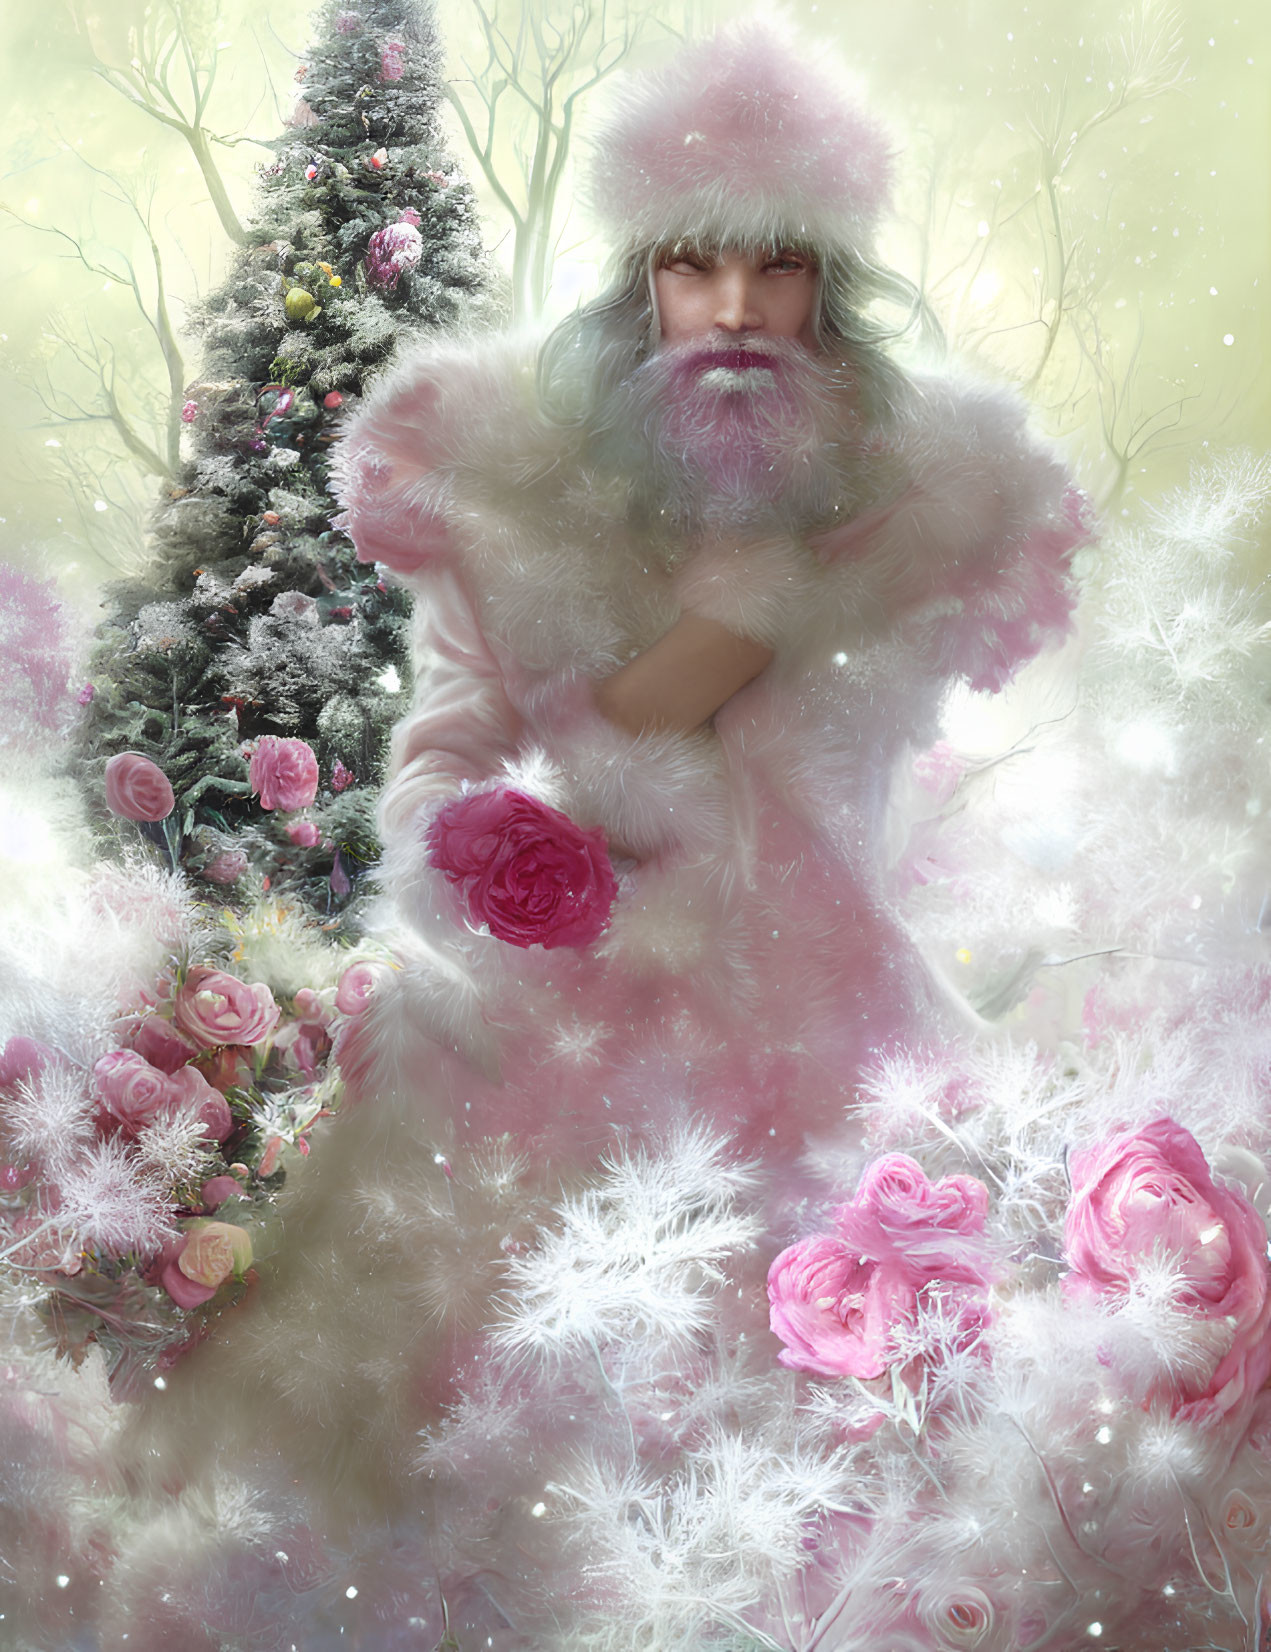 Ethereal figure in pink and white outfit near snow-dusted Christmas tree